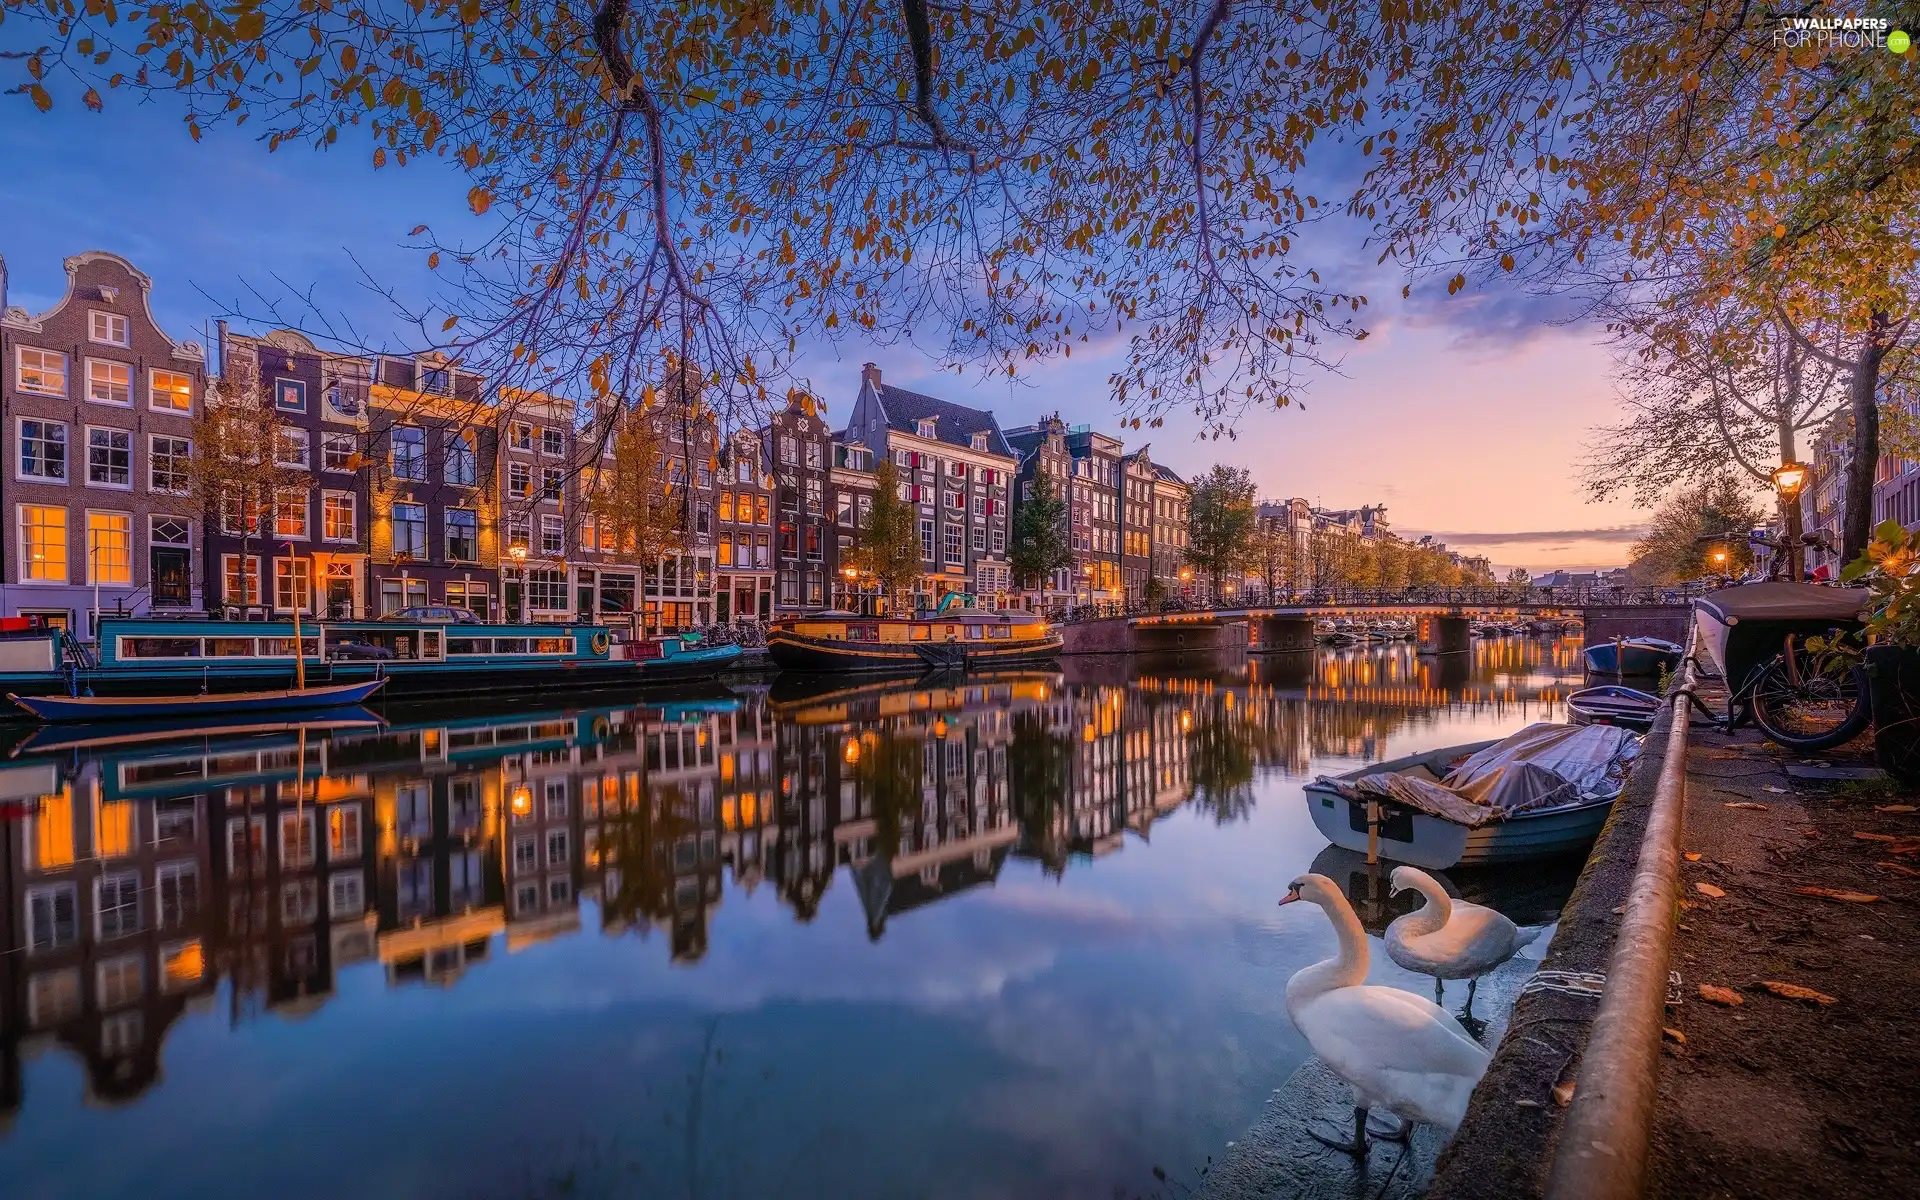 Amsterdam, Netherlands, Houses, canal, Swan, Boats, trees, viewes, autumn